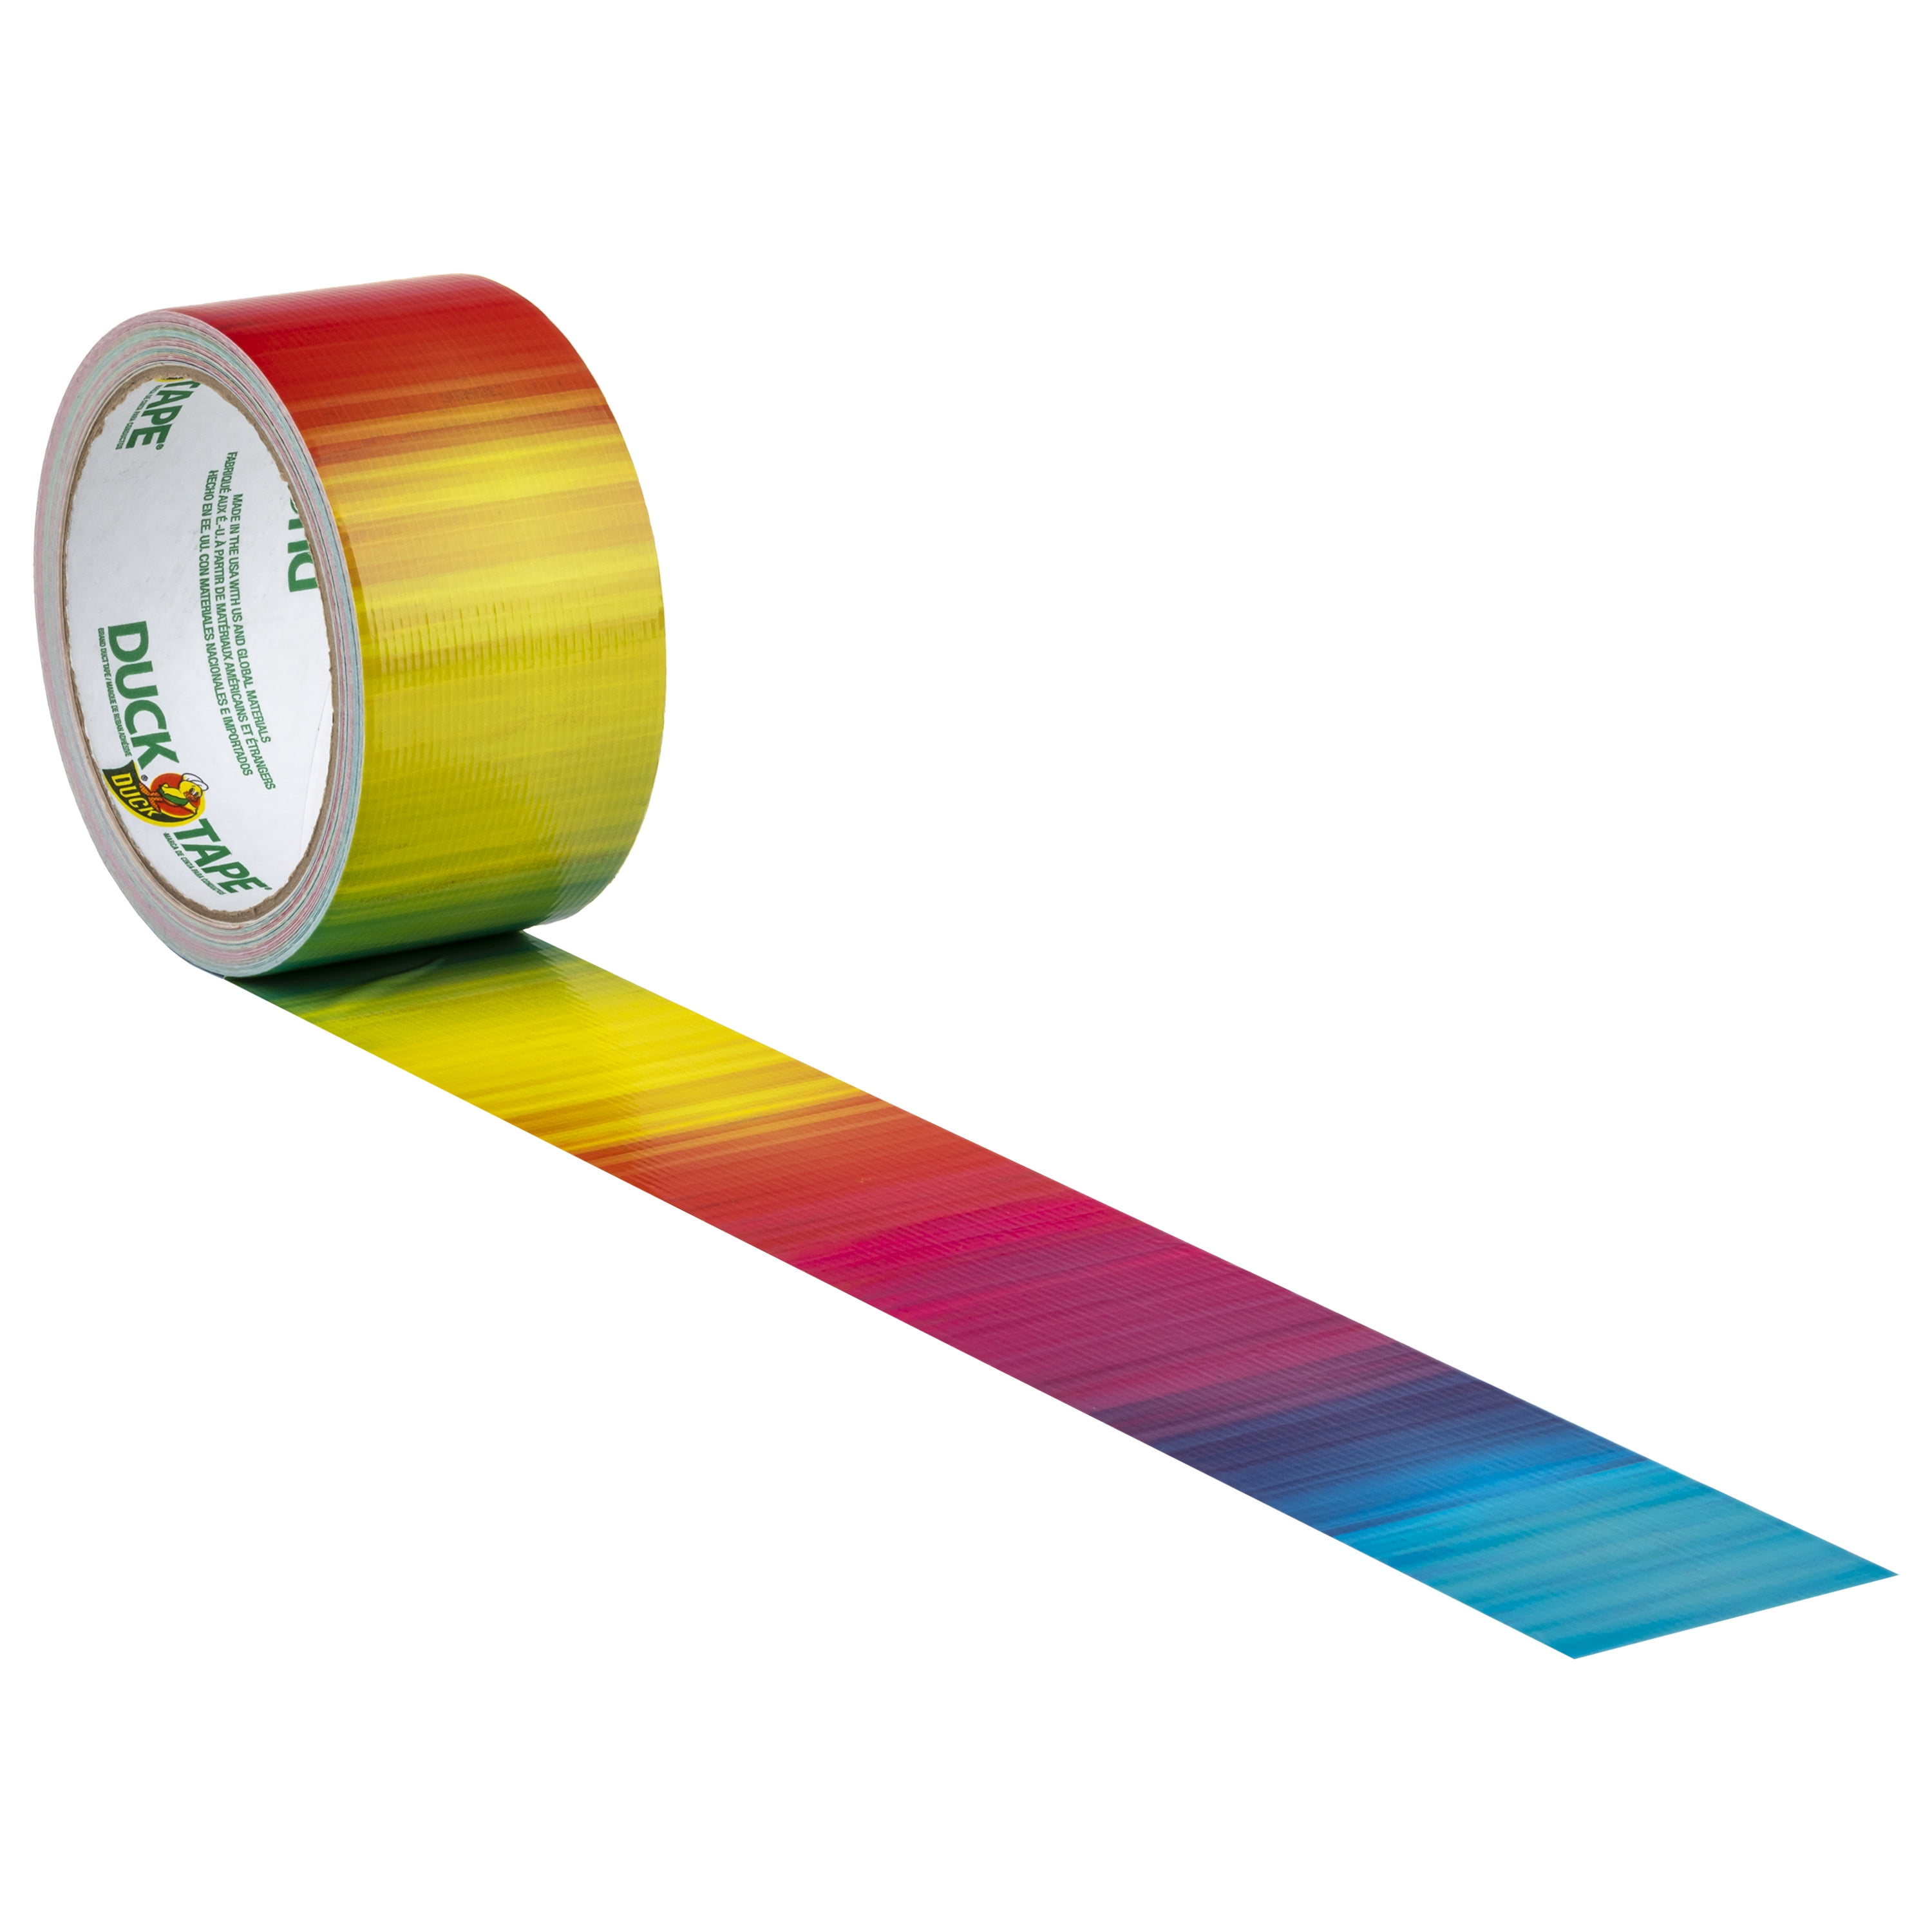 AMOGATO Colored Duct Tape - 1 Inch x 10 Yards per Rolls,Multi-Color Duct  Tapes, Rainbow Colored Duct Tape Great for DIY Art Home School Office  Assorted Colors: : Industrial & Scientific